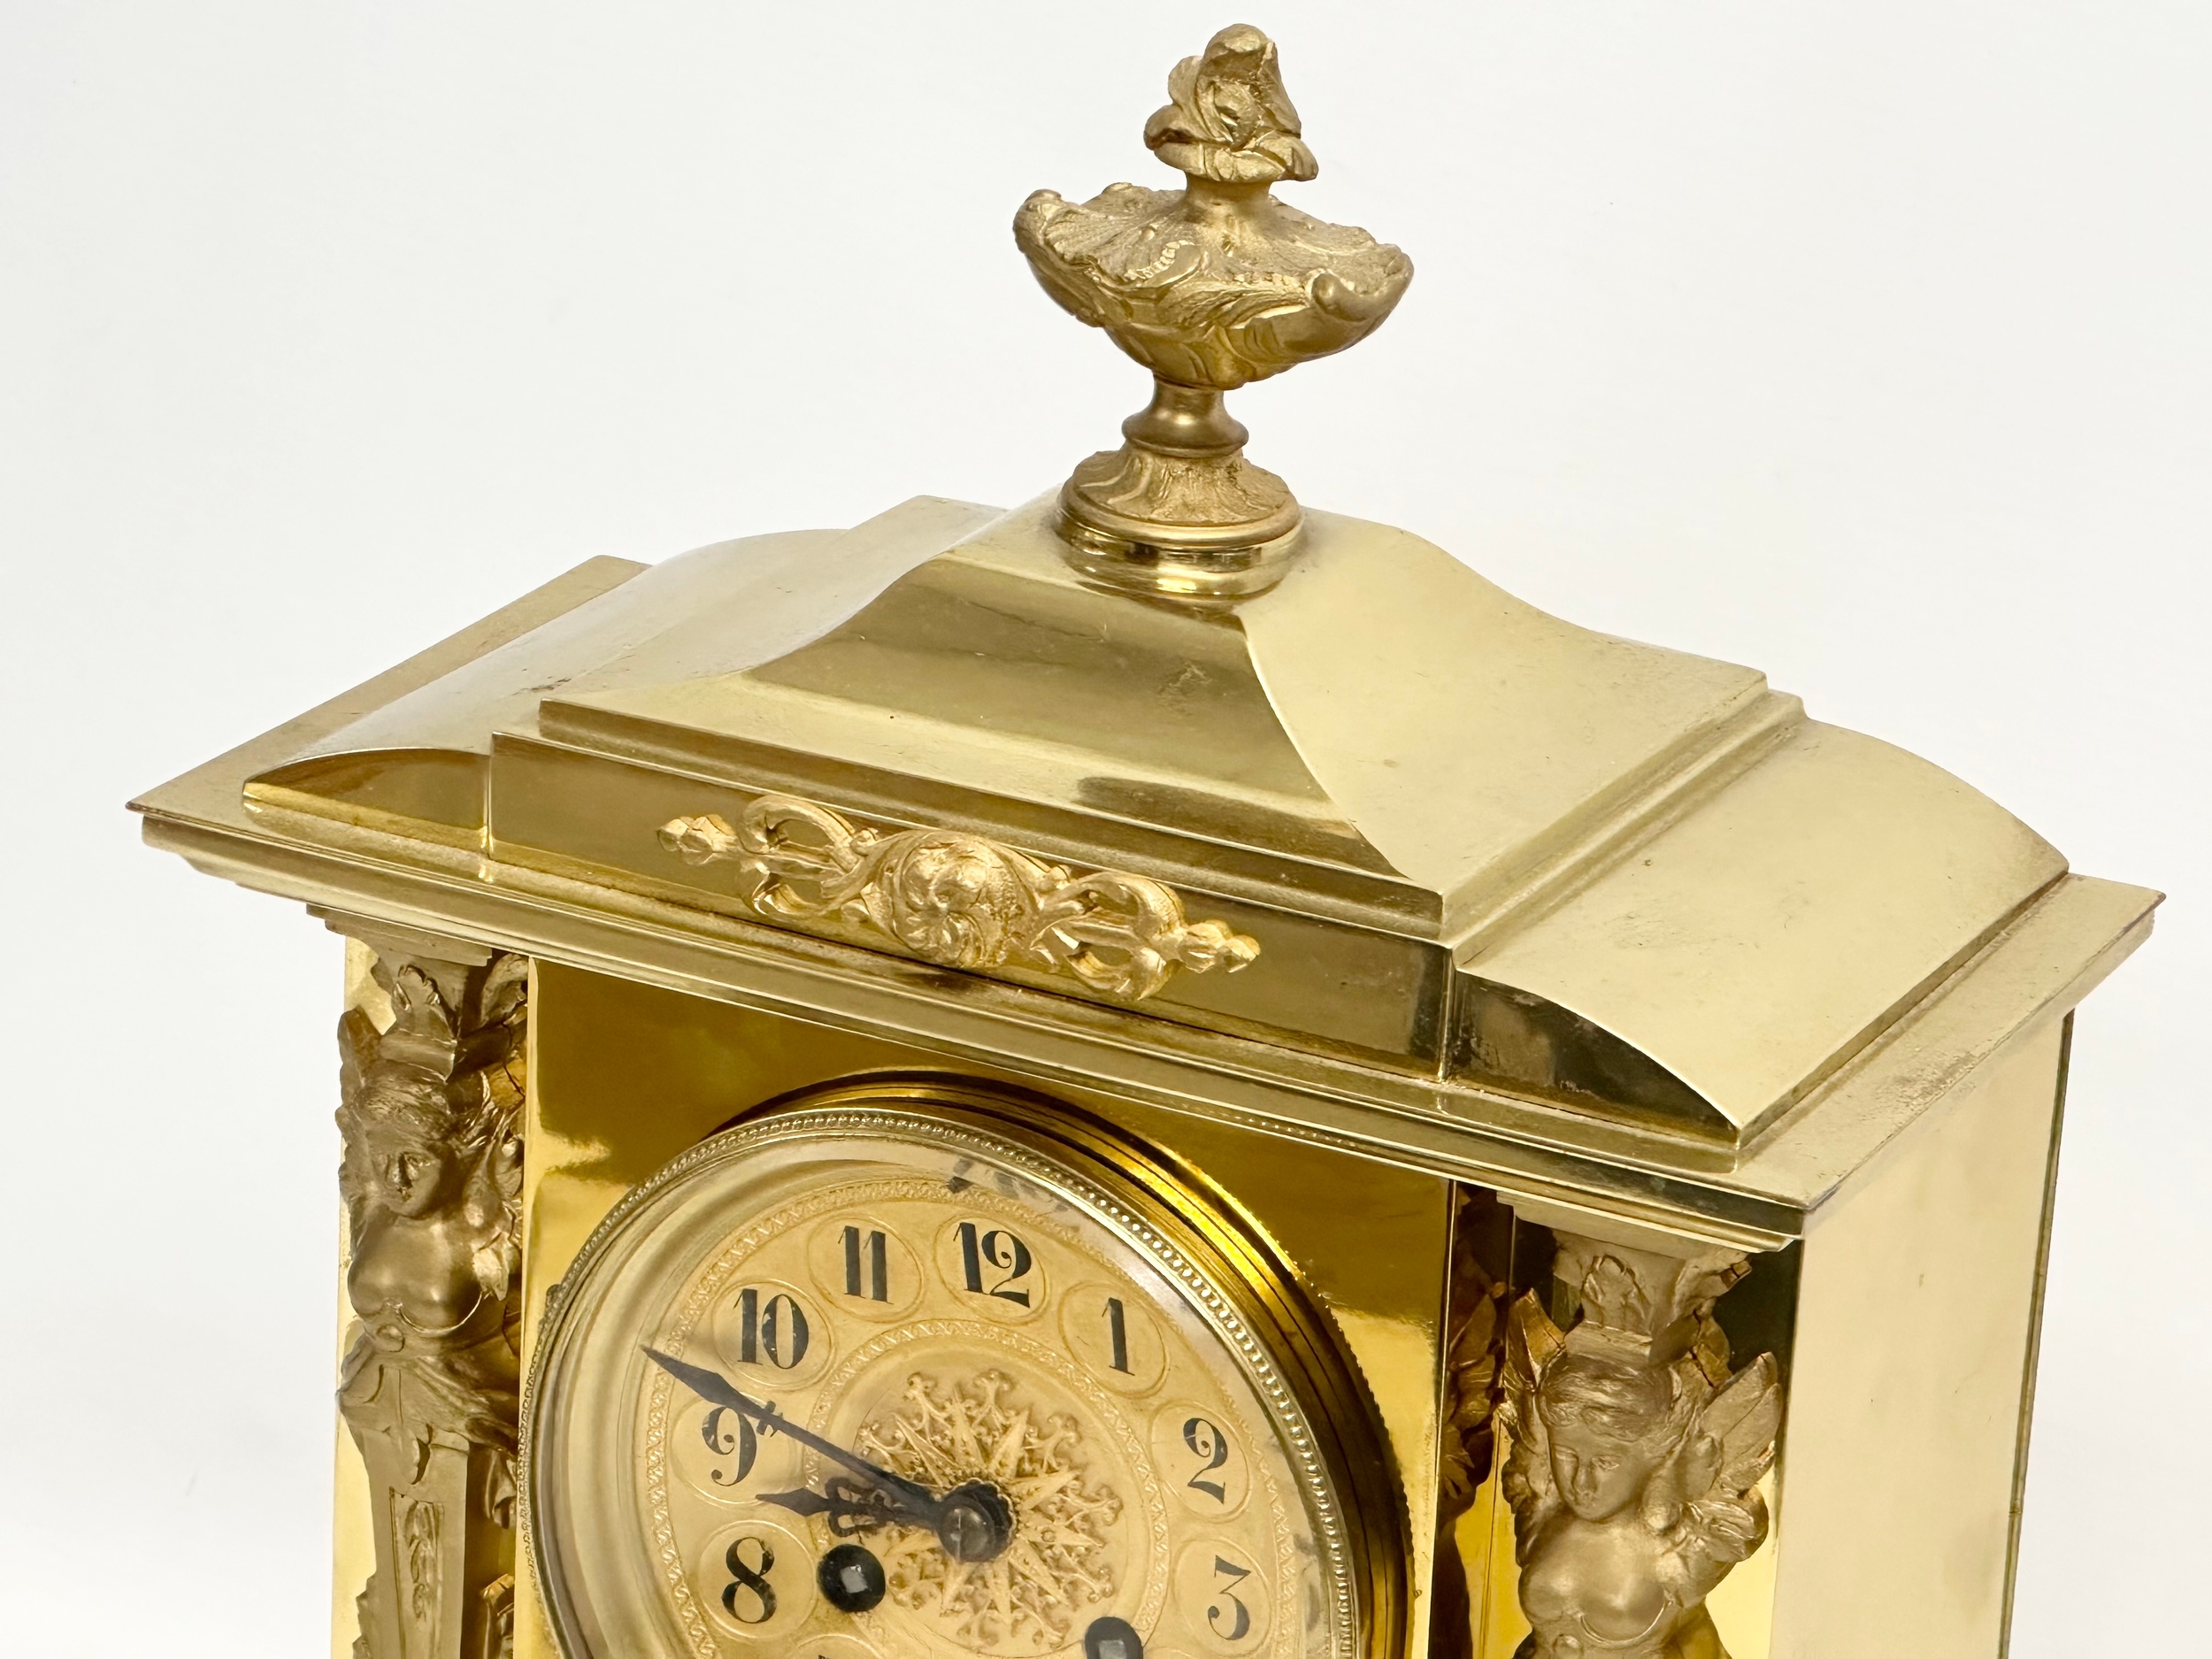 A late 19th century French brass mantle clock on stand. L. Marti Medaille D’Argent 1889. With key - Image 2 of 9